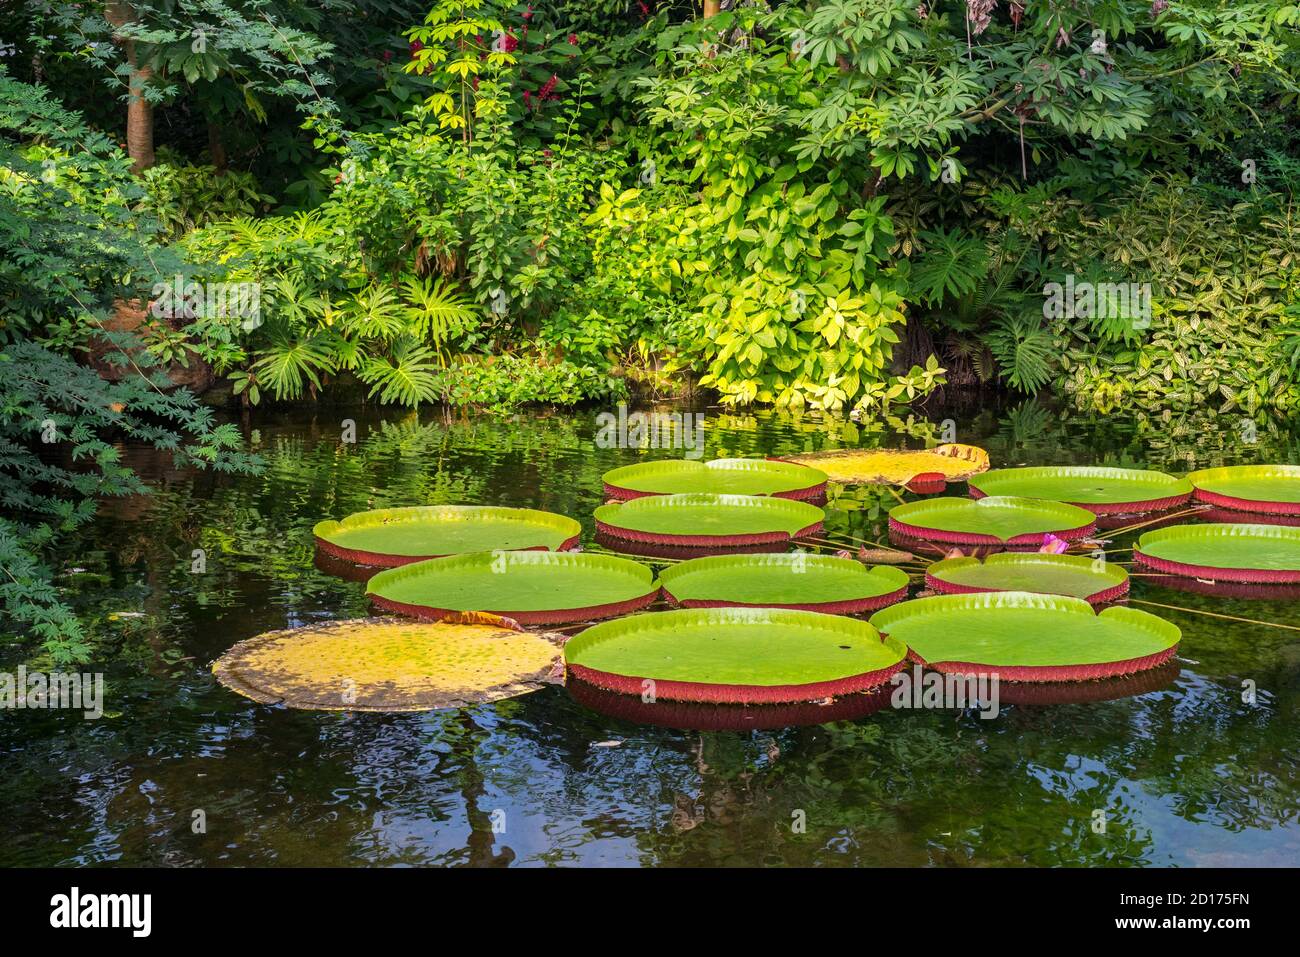 Floating leaves of the giant water lily (Victoria amazonica / Nymphaea victoria / Victoria regia), largest waterlily in the world Stock Photo